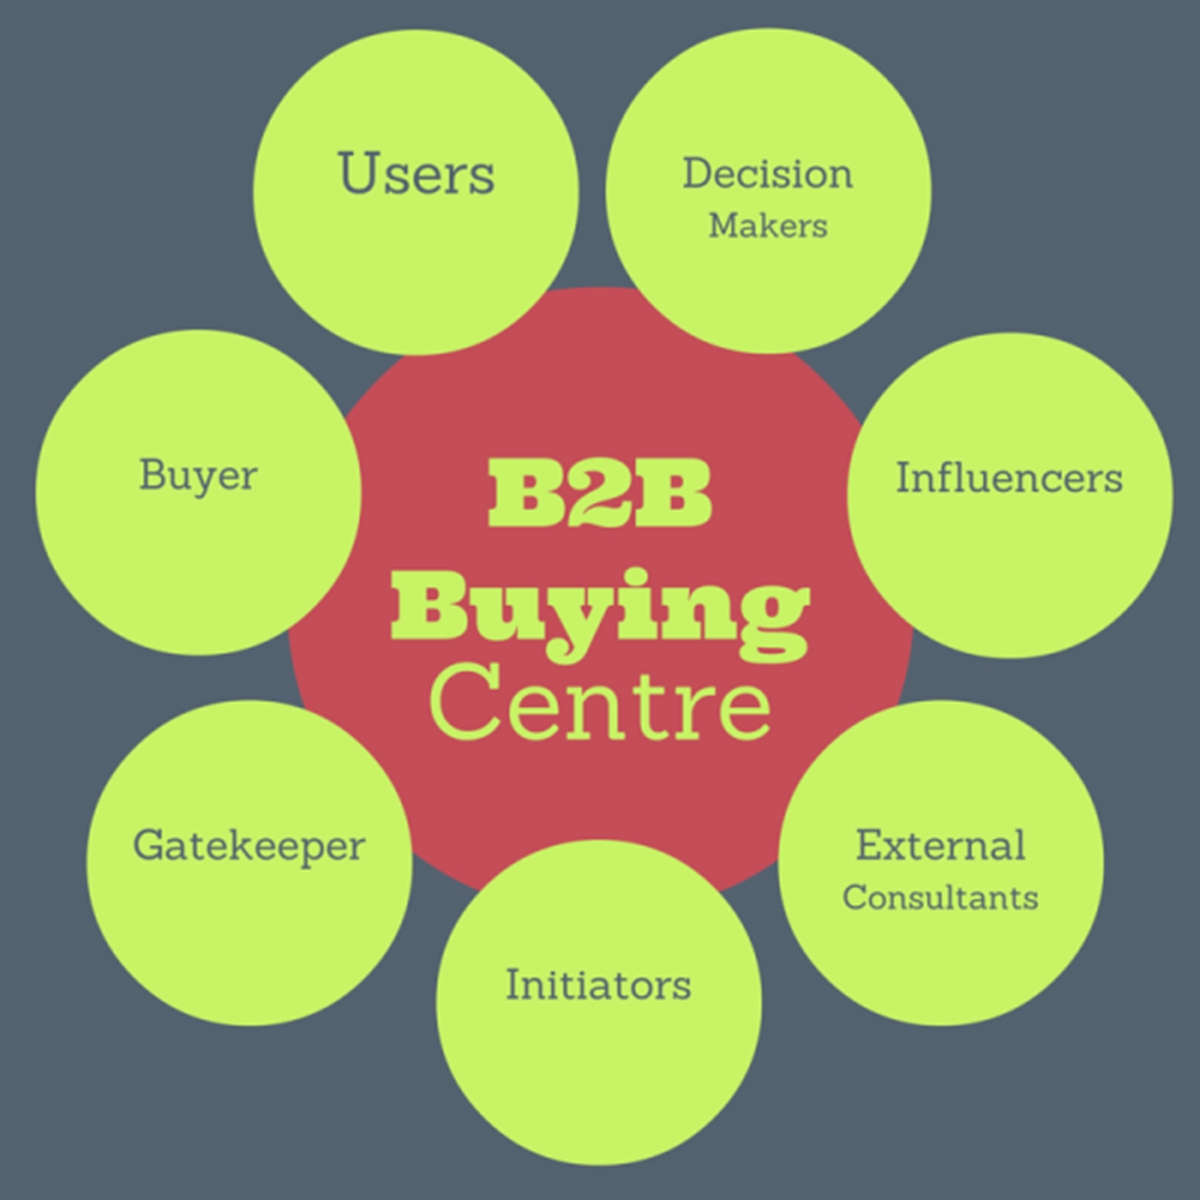 Build go-to-market strategy: Buying Centre